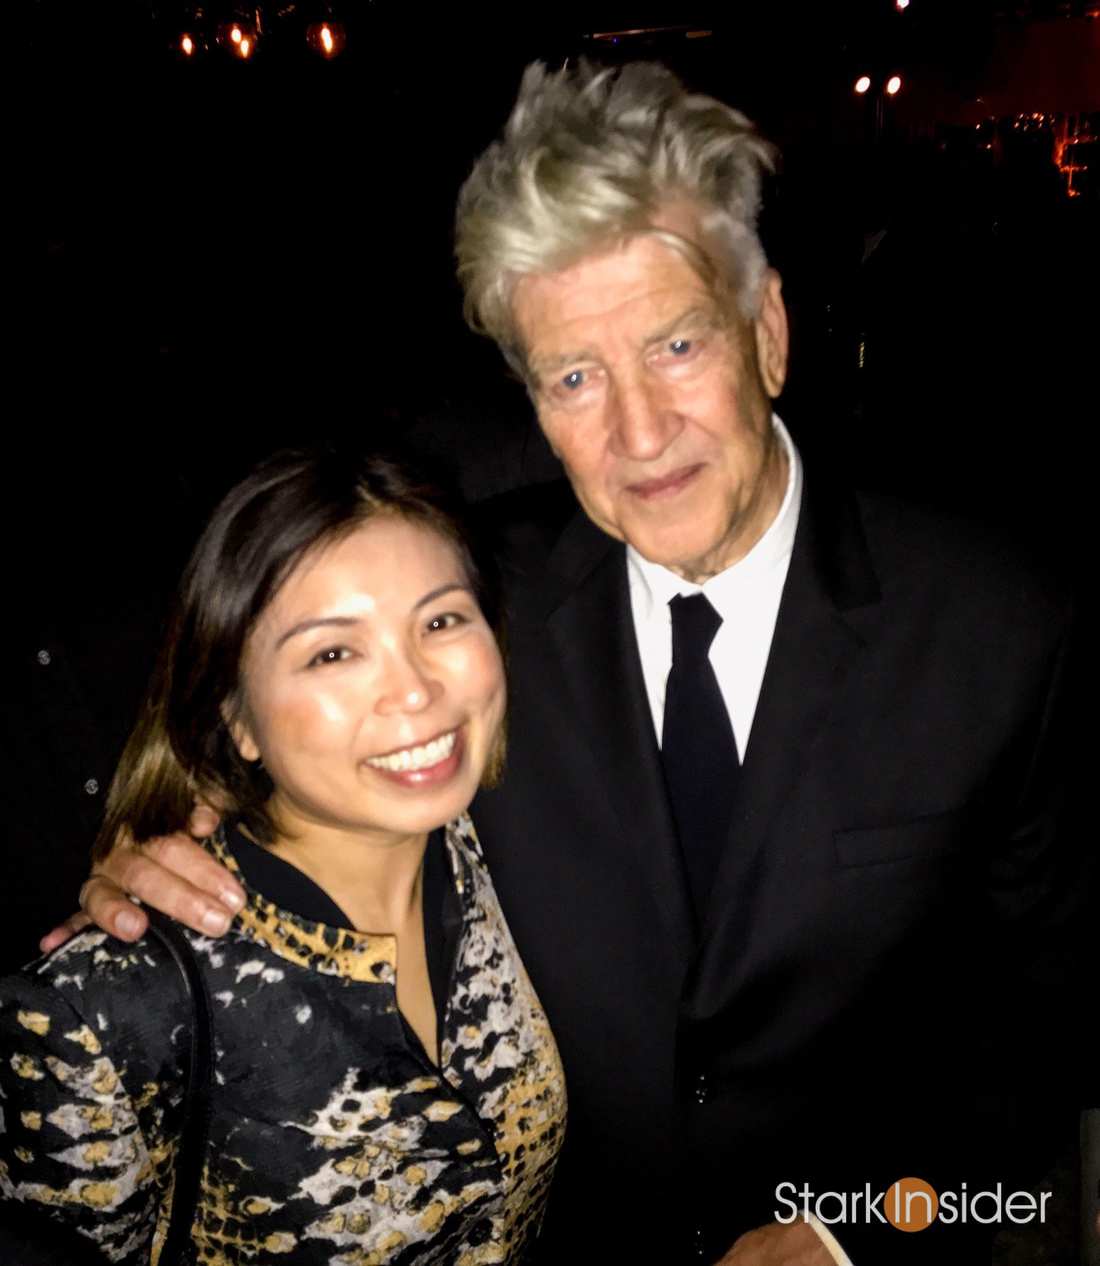 Loni Stark with David Lynch at the Festival of Disruption 2017 in Los Angeles, California.